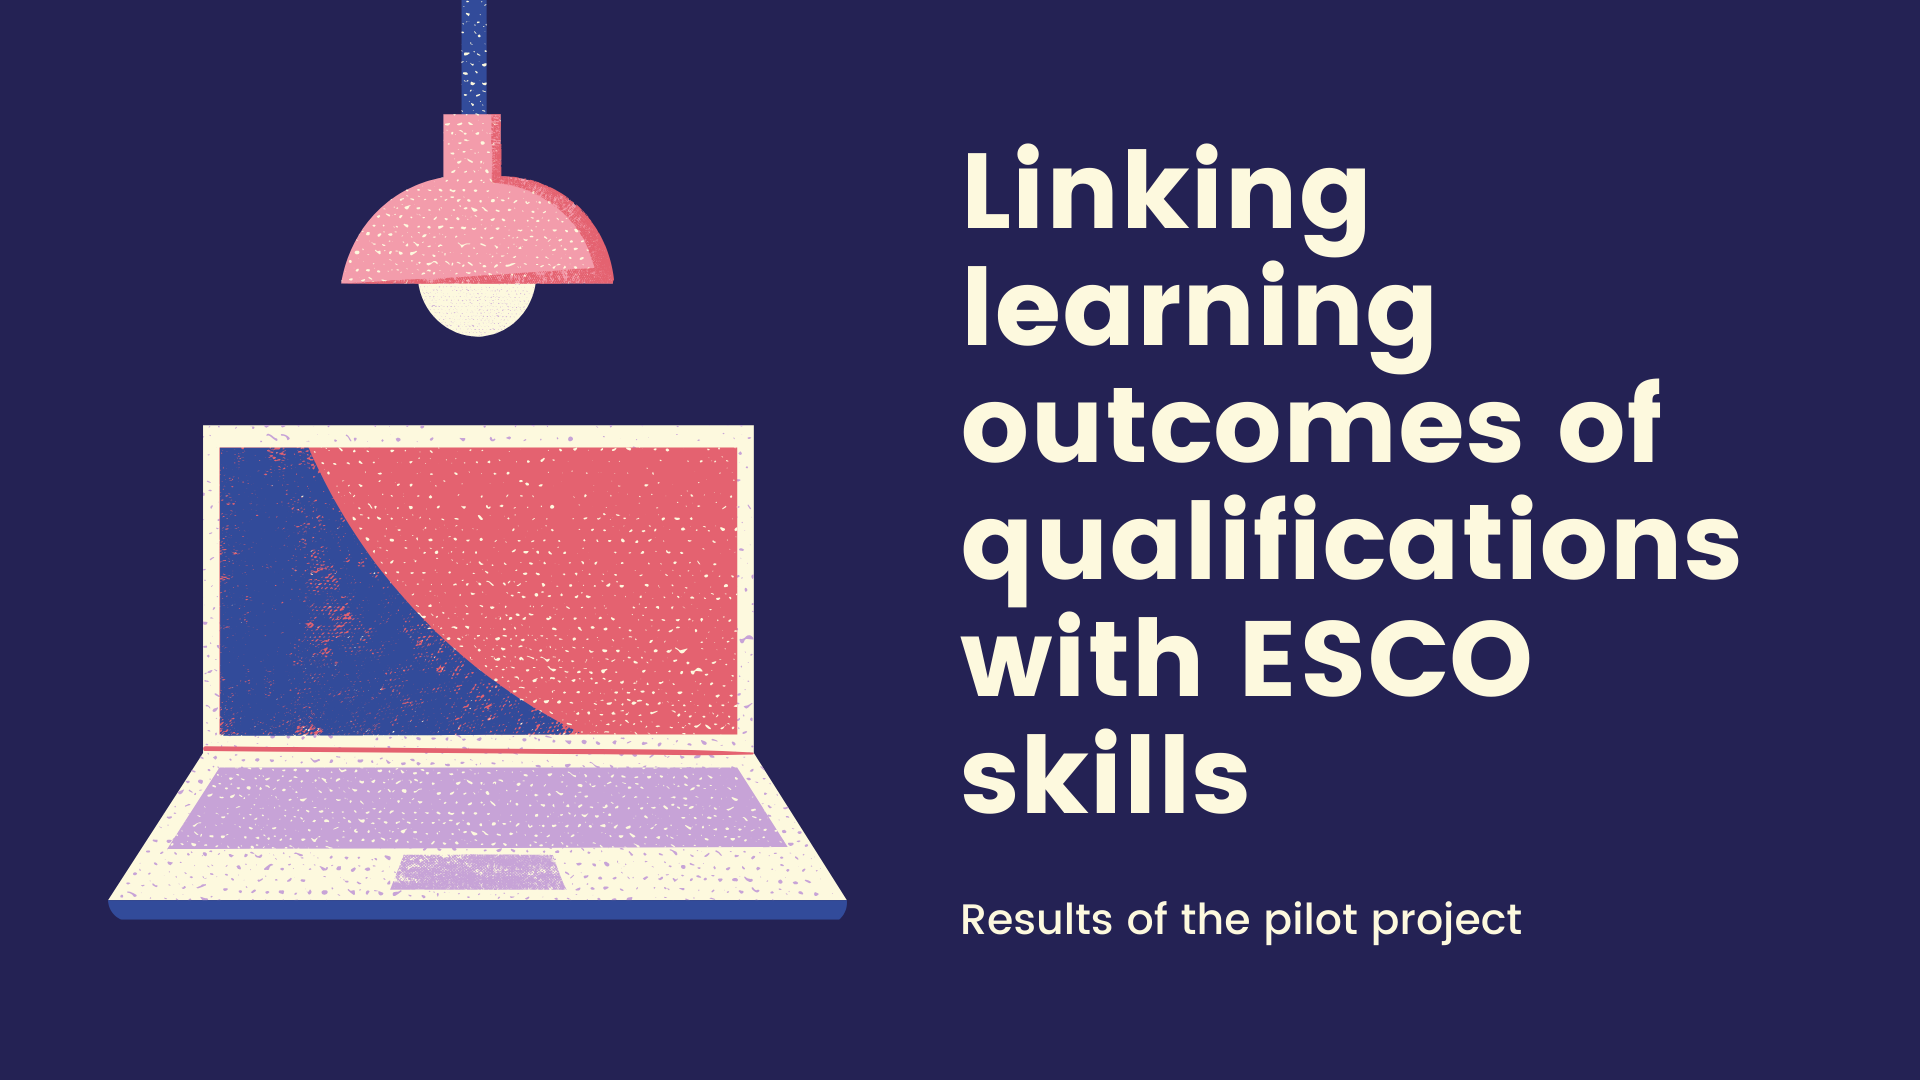 Image with an icon of laptop and text next to it: Linking learning outcomes of qualifications with ESCO skills: result of the pilot project